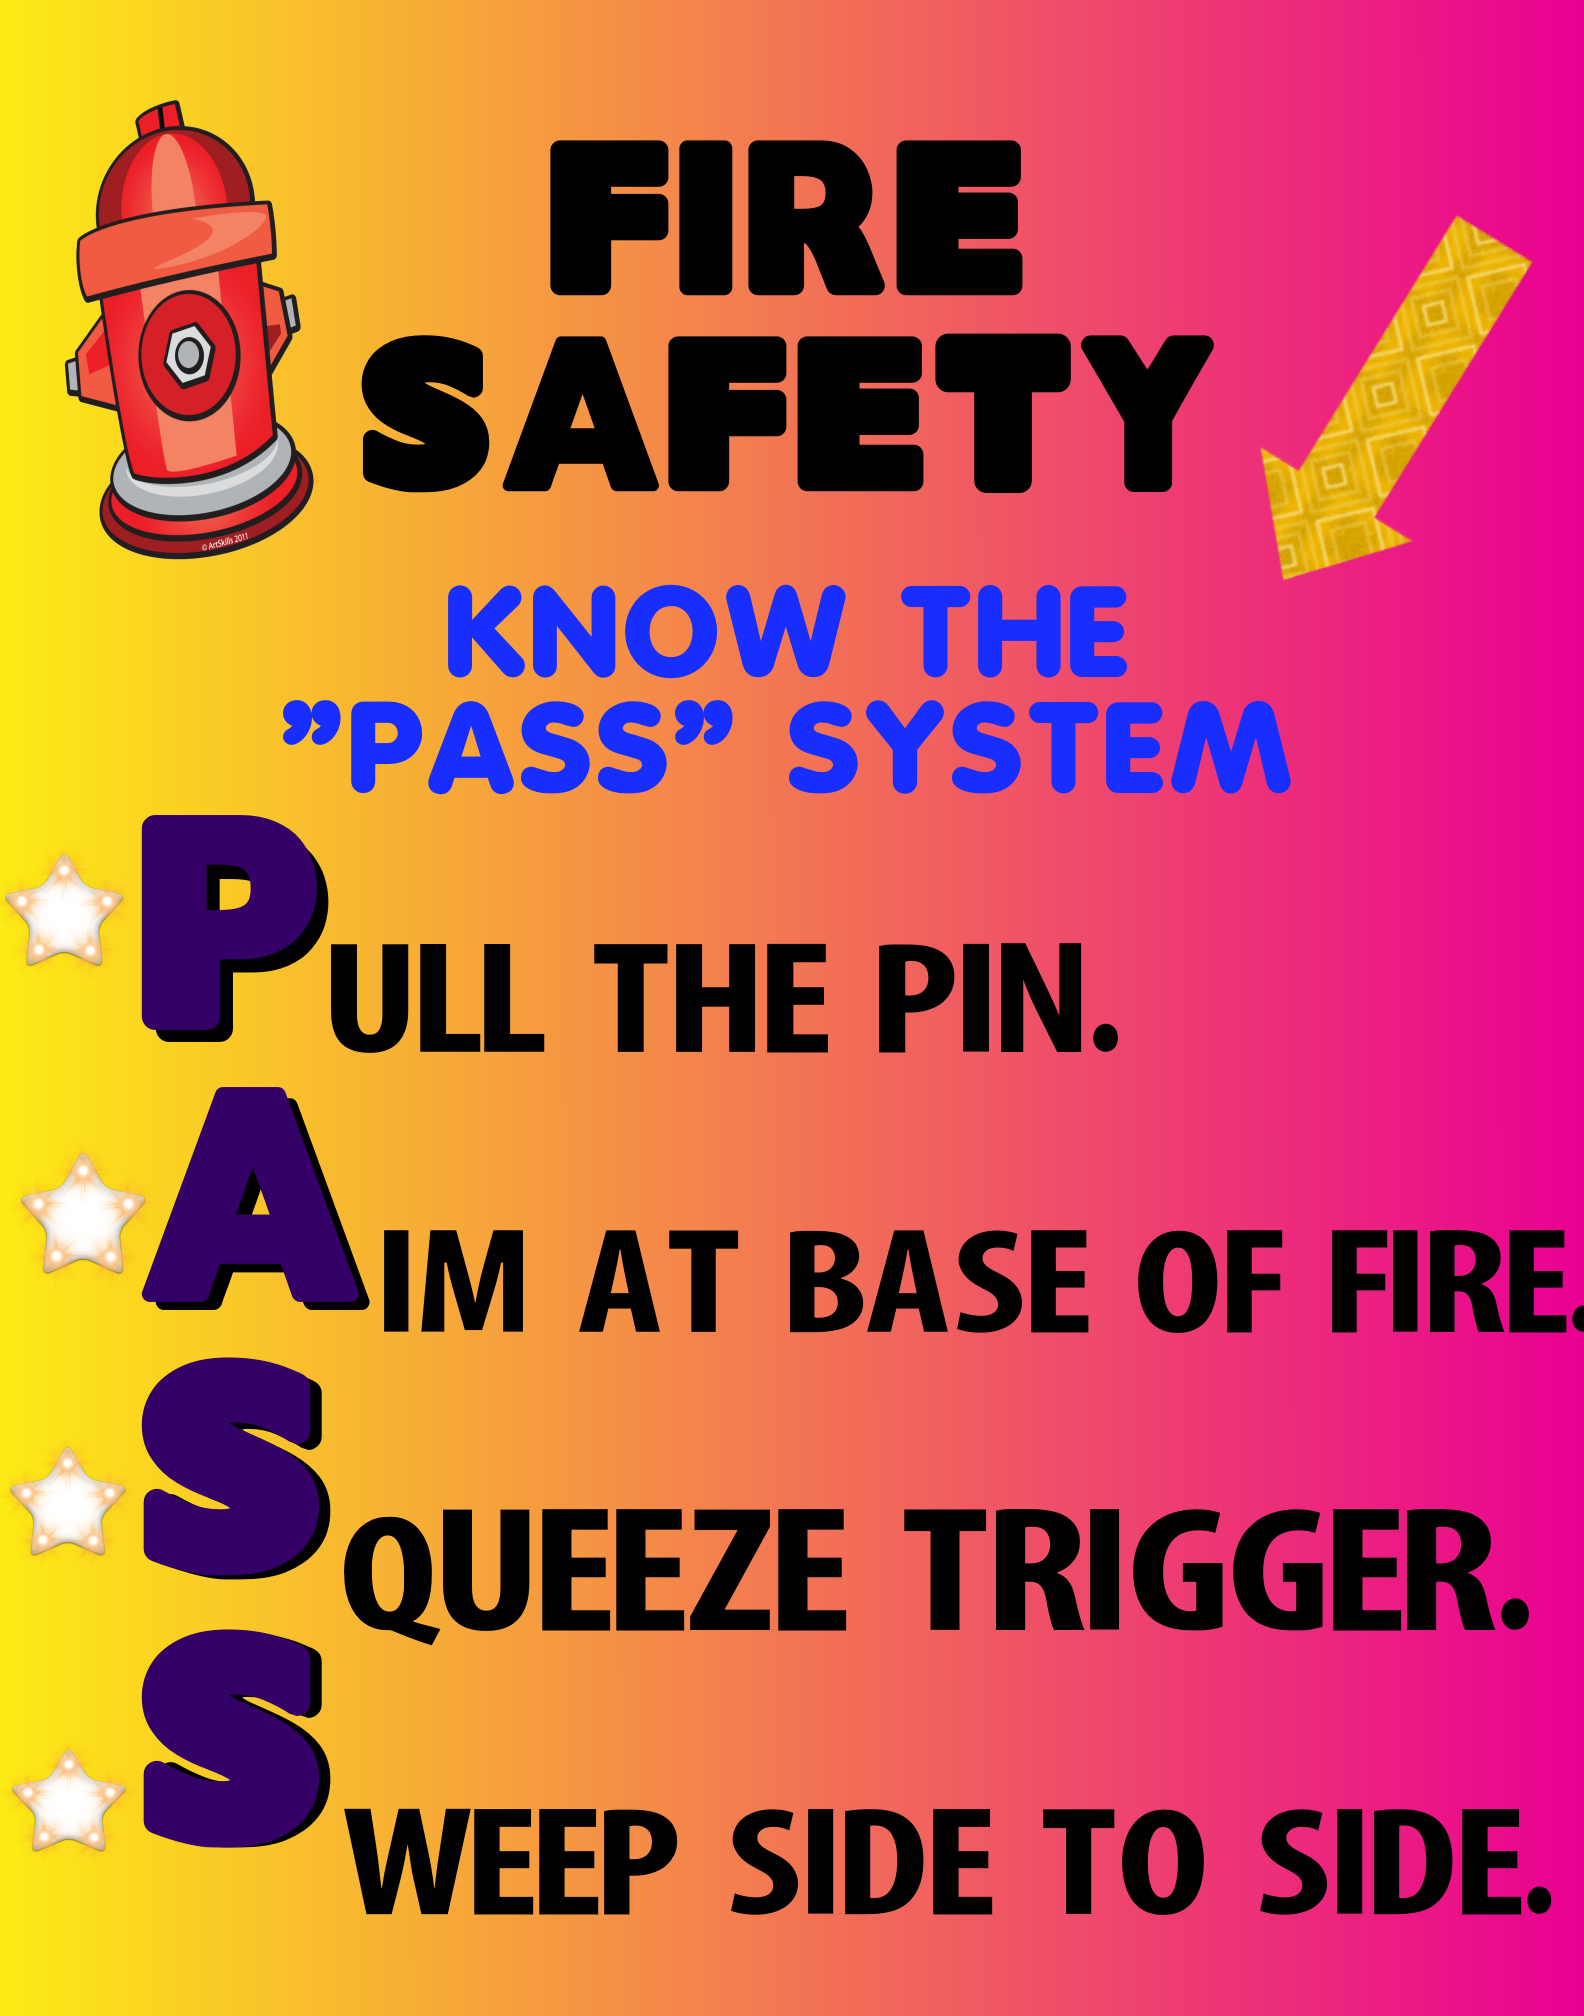 Make A Fire Safety Poster   Fire Safety Poster Ideas